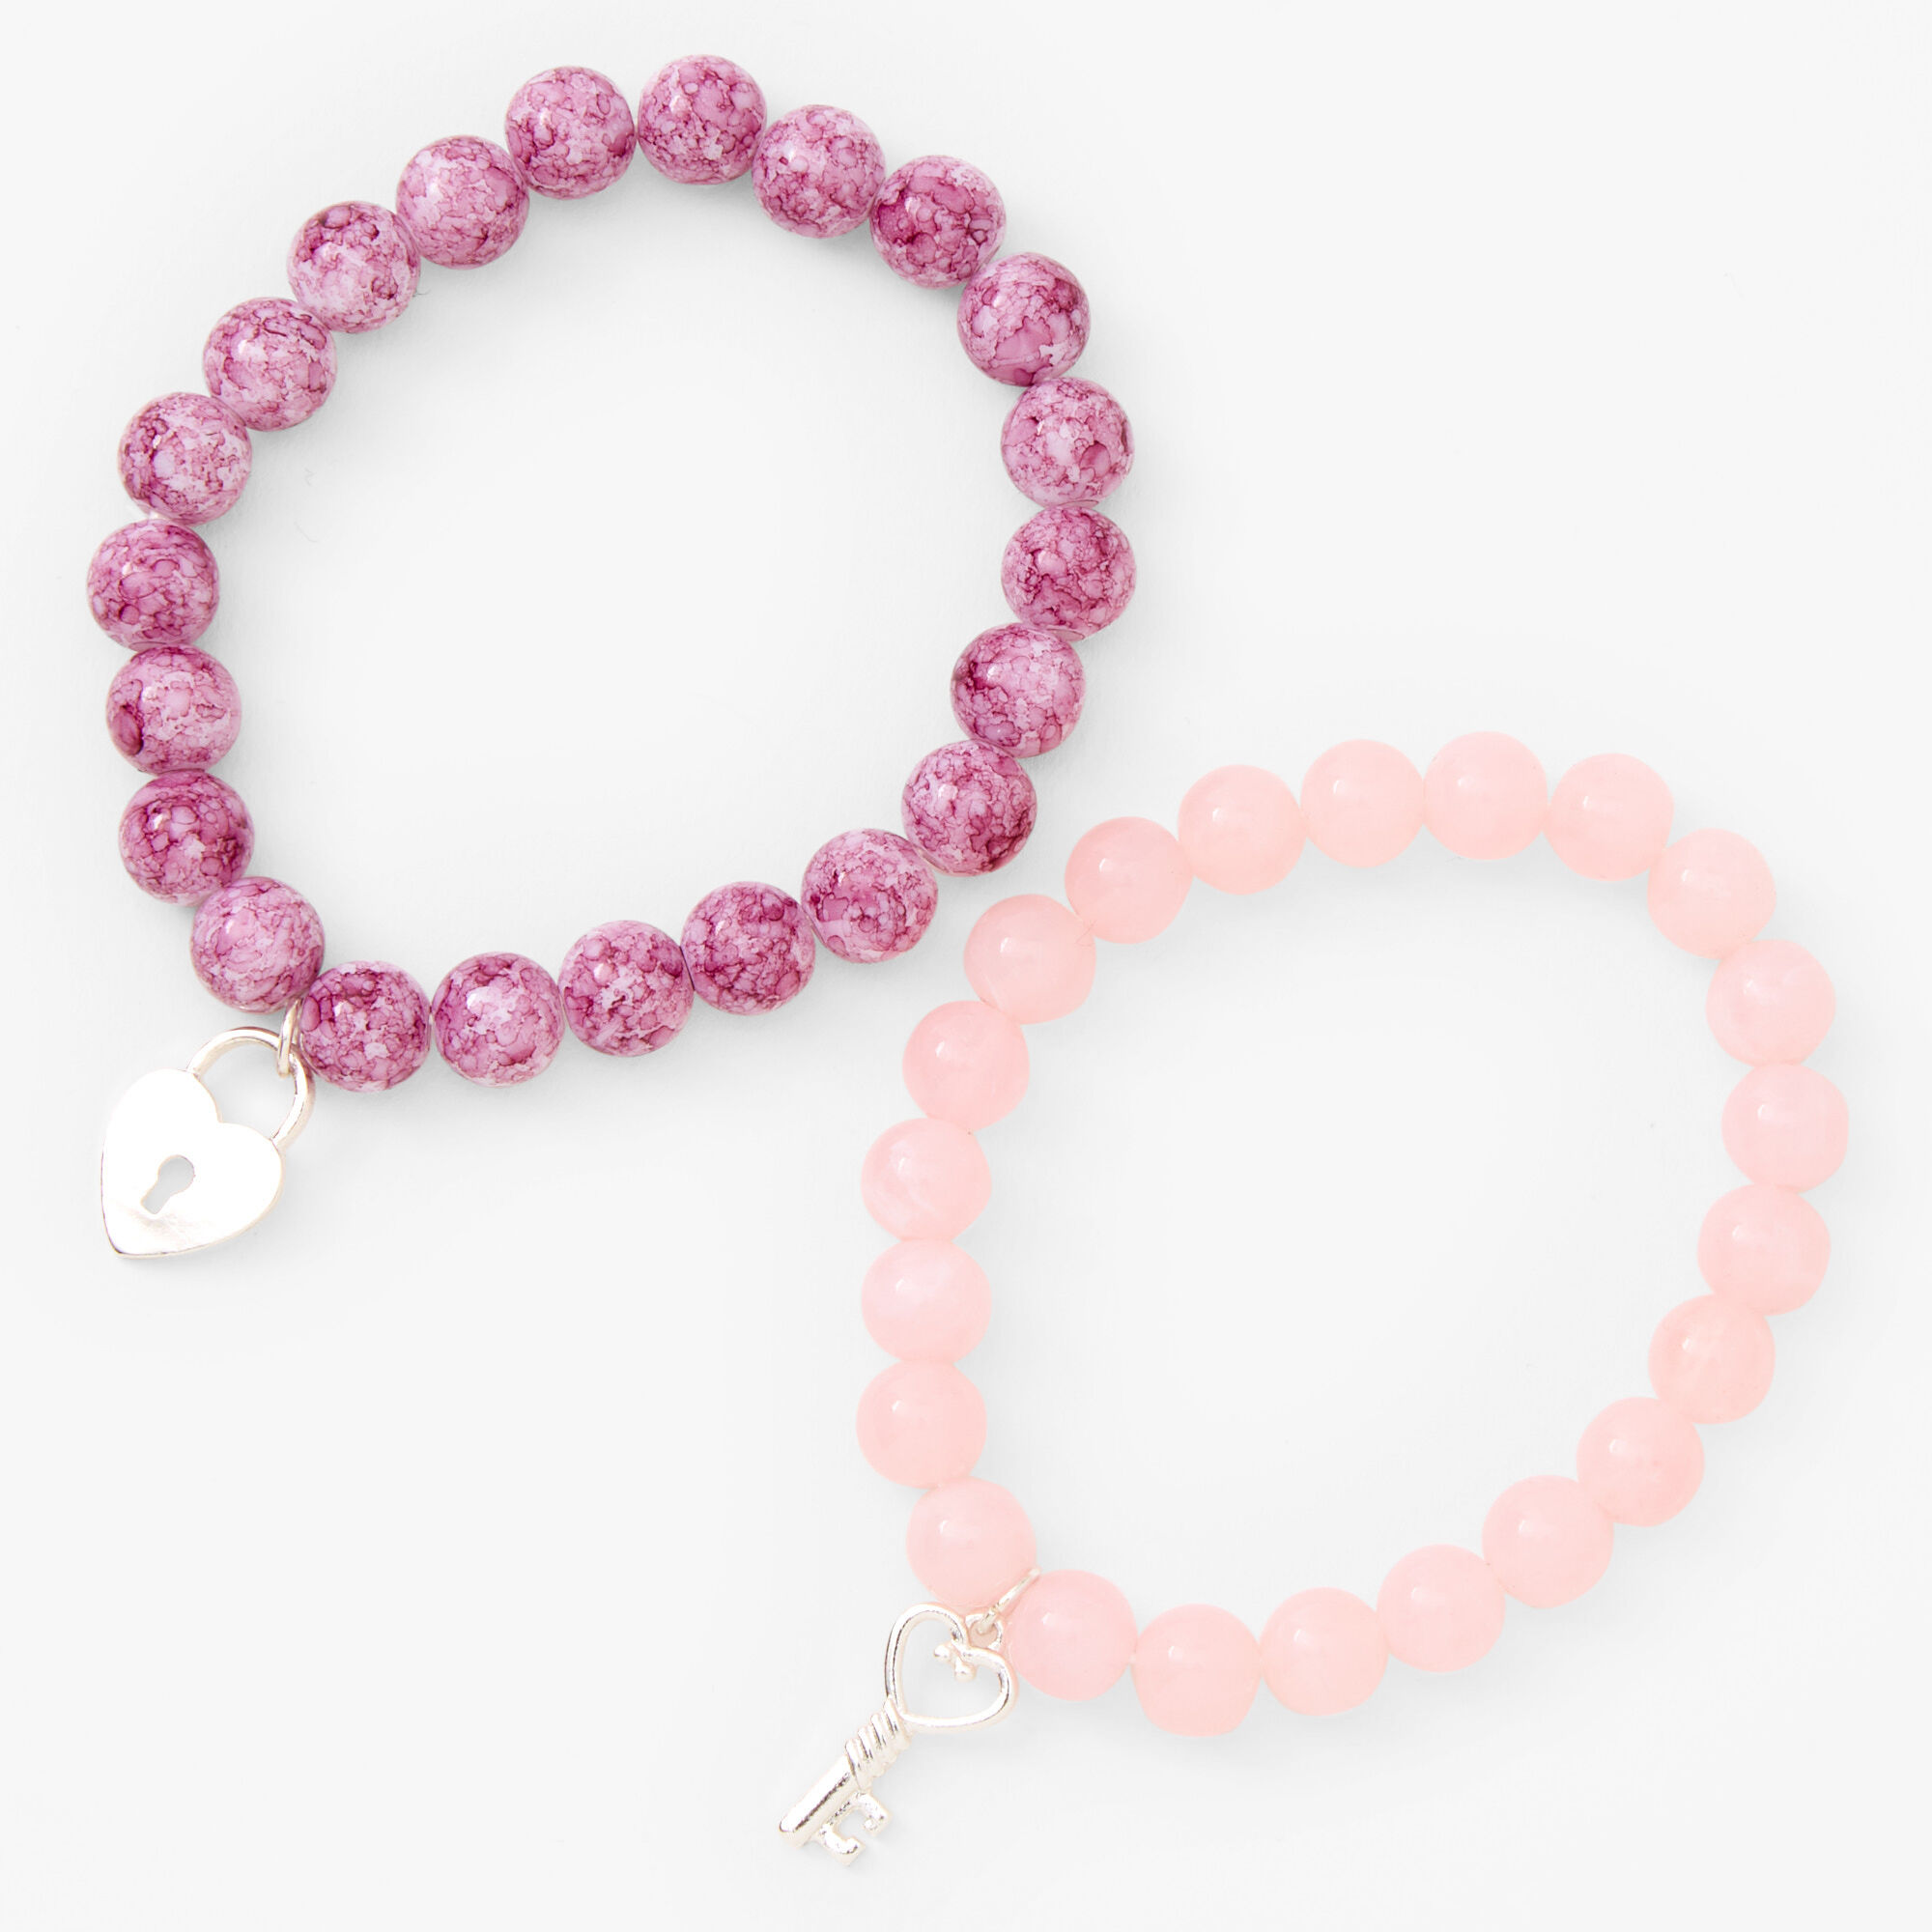 View Claires Blush Heart Lock Key Beaded Stretch Bracelet 2 Pack Pink information